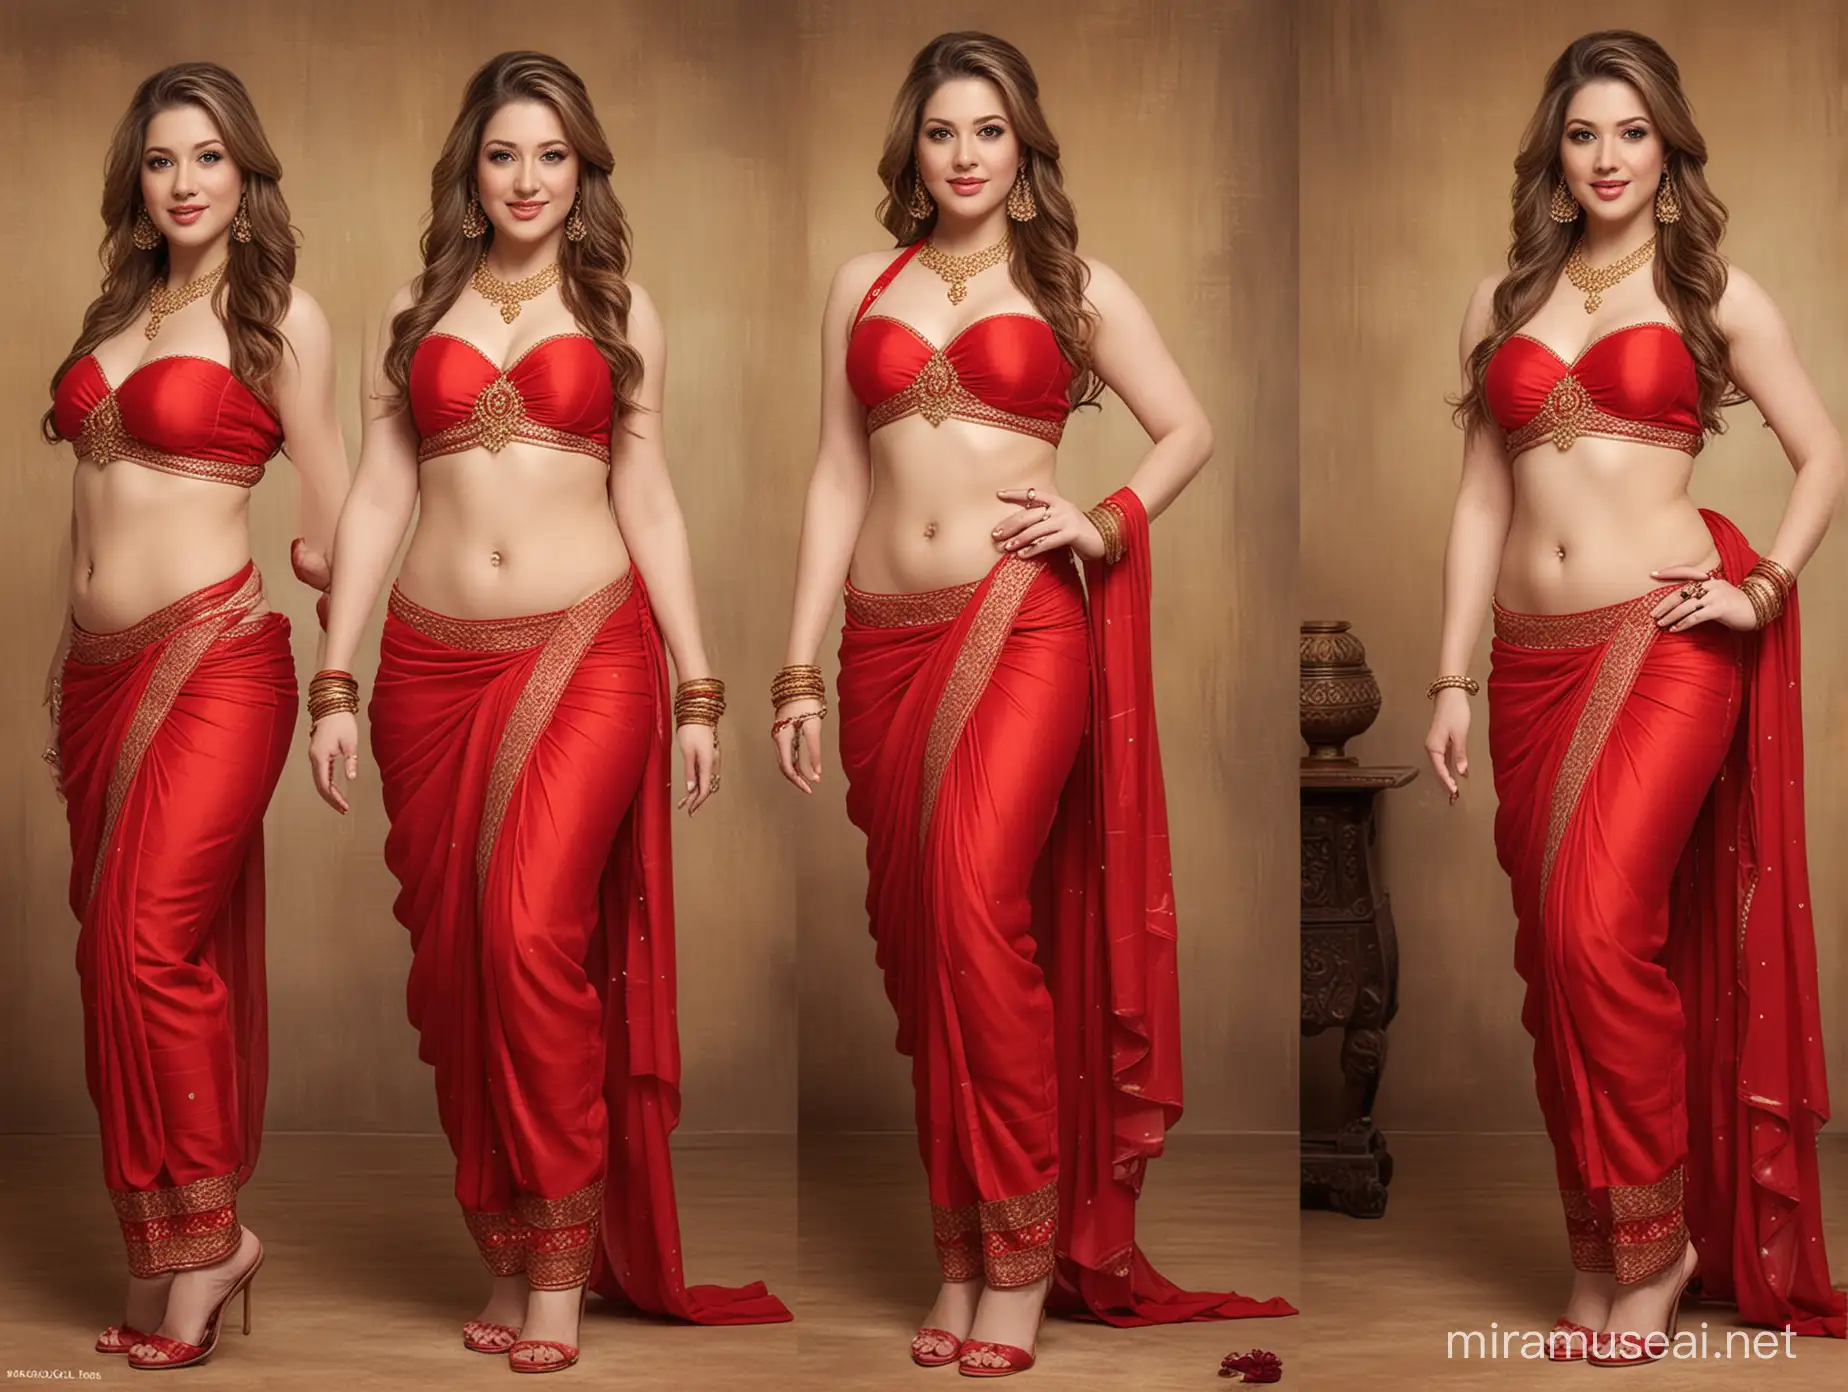 generate an illustration art style image of Sunny Lane wearing traditional bandeau red lingerie, red saree and red Indian Sheer dhoti, with appropriate accessories such as bangles, armlets and a bindi, while maintaining her recognizable features and elegance.. full body image.